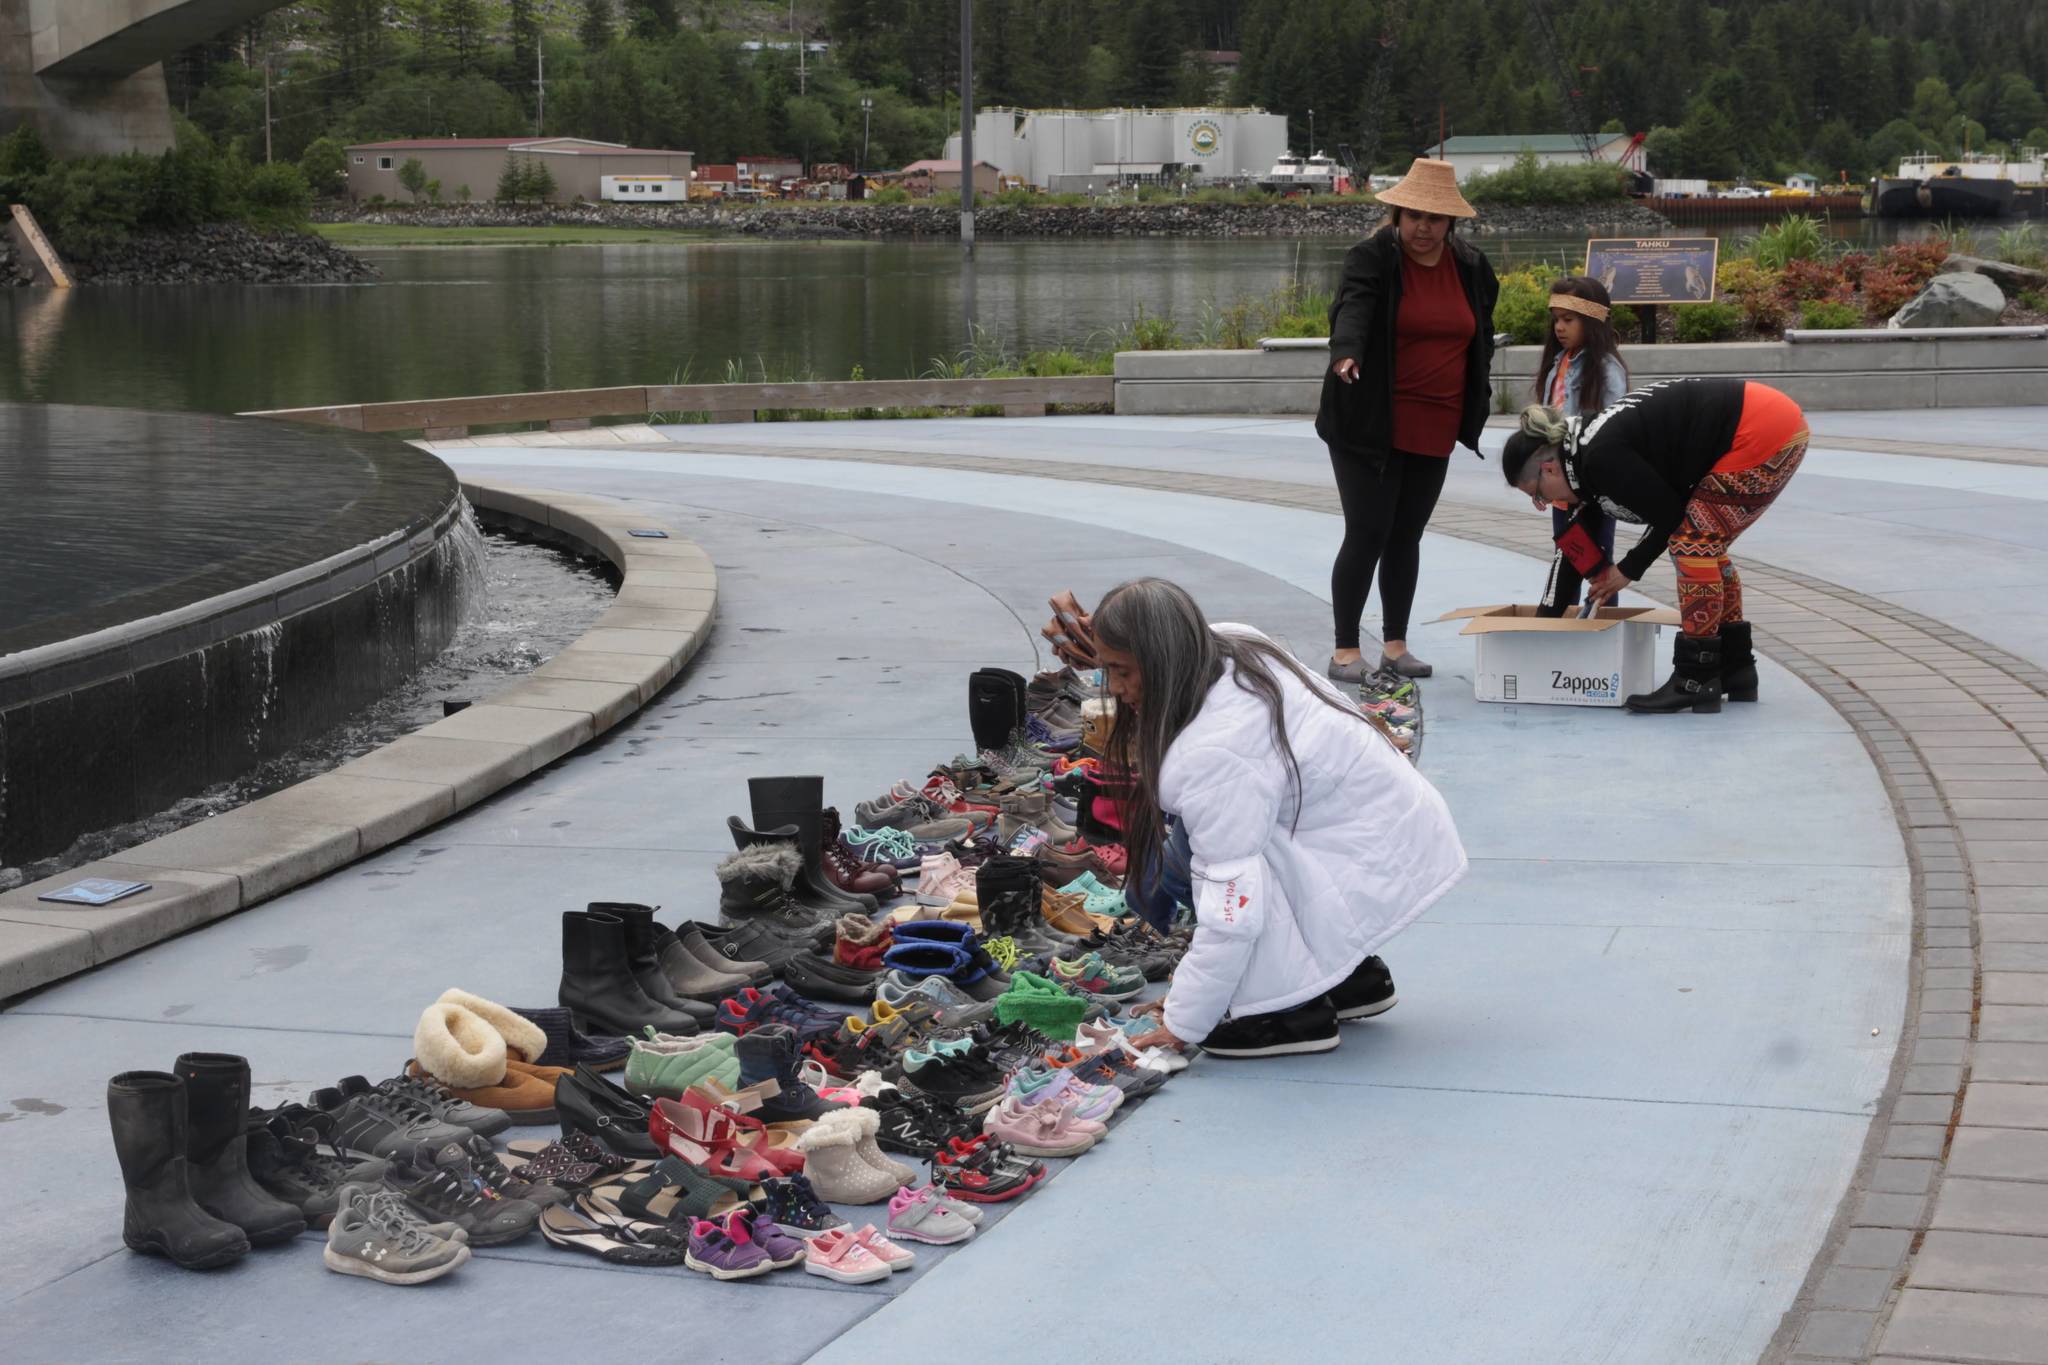 Juneau residents place hundreds of pairs of children's shoes in front of the state at Mayor Bill Overstreet Park on June 12, 2021 as they mourned for the 215 dead children uncovered at a residential school in Canada. (Michael S. Lockett / Juneau Empire)